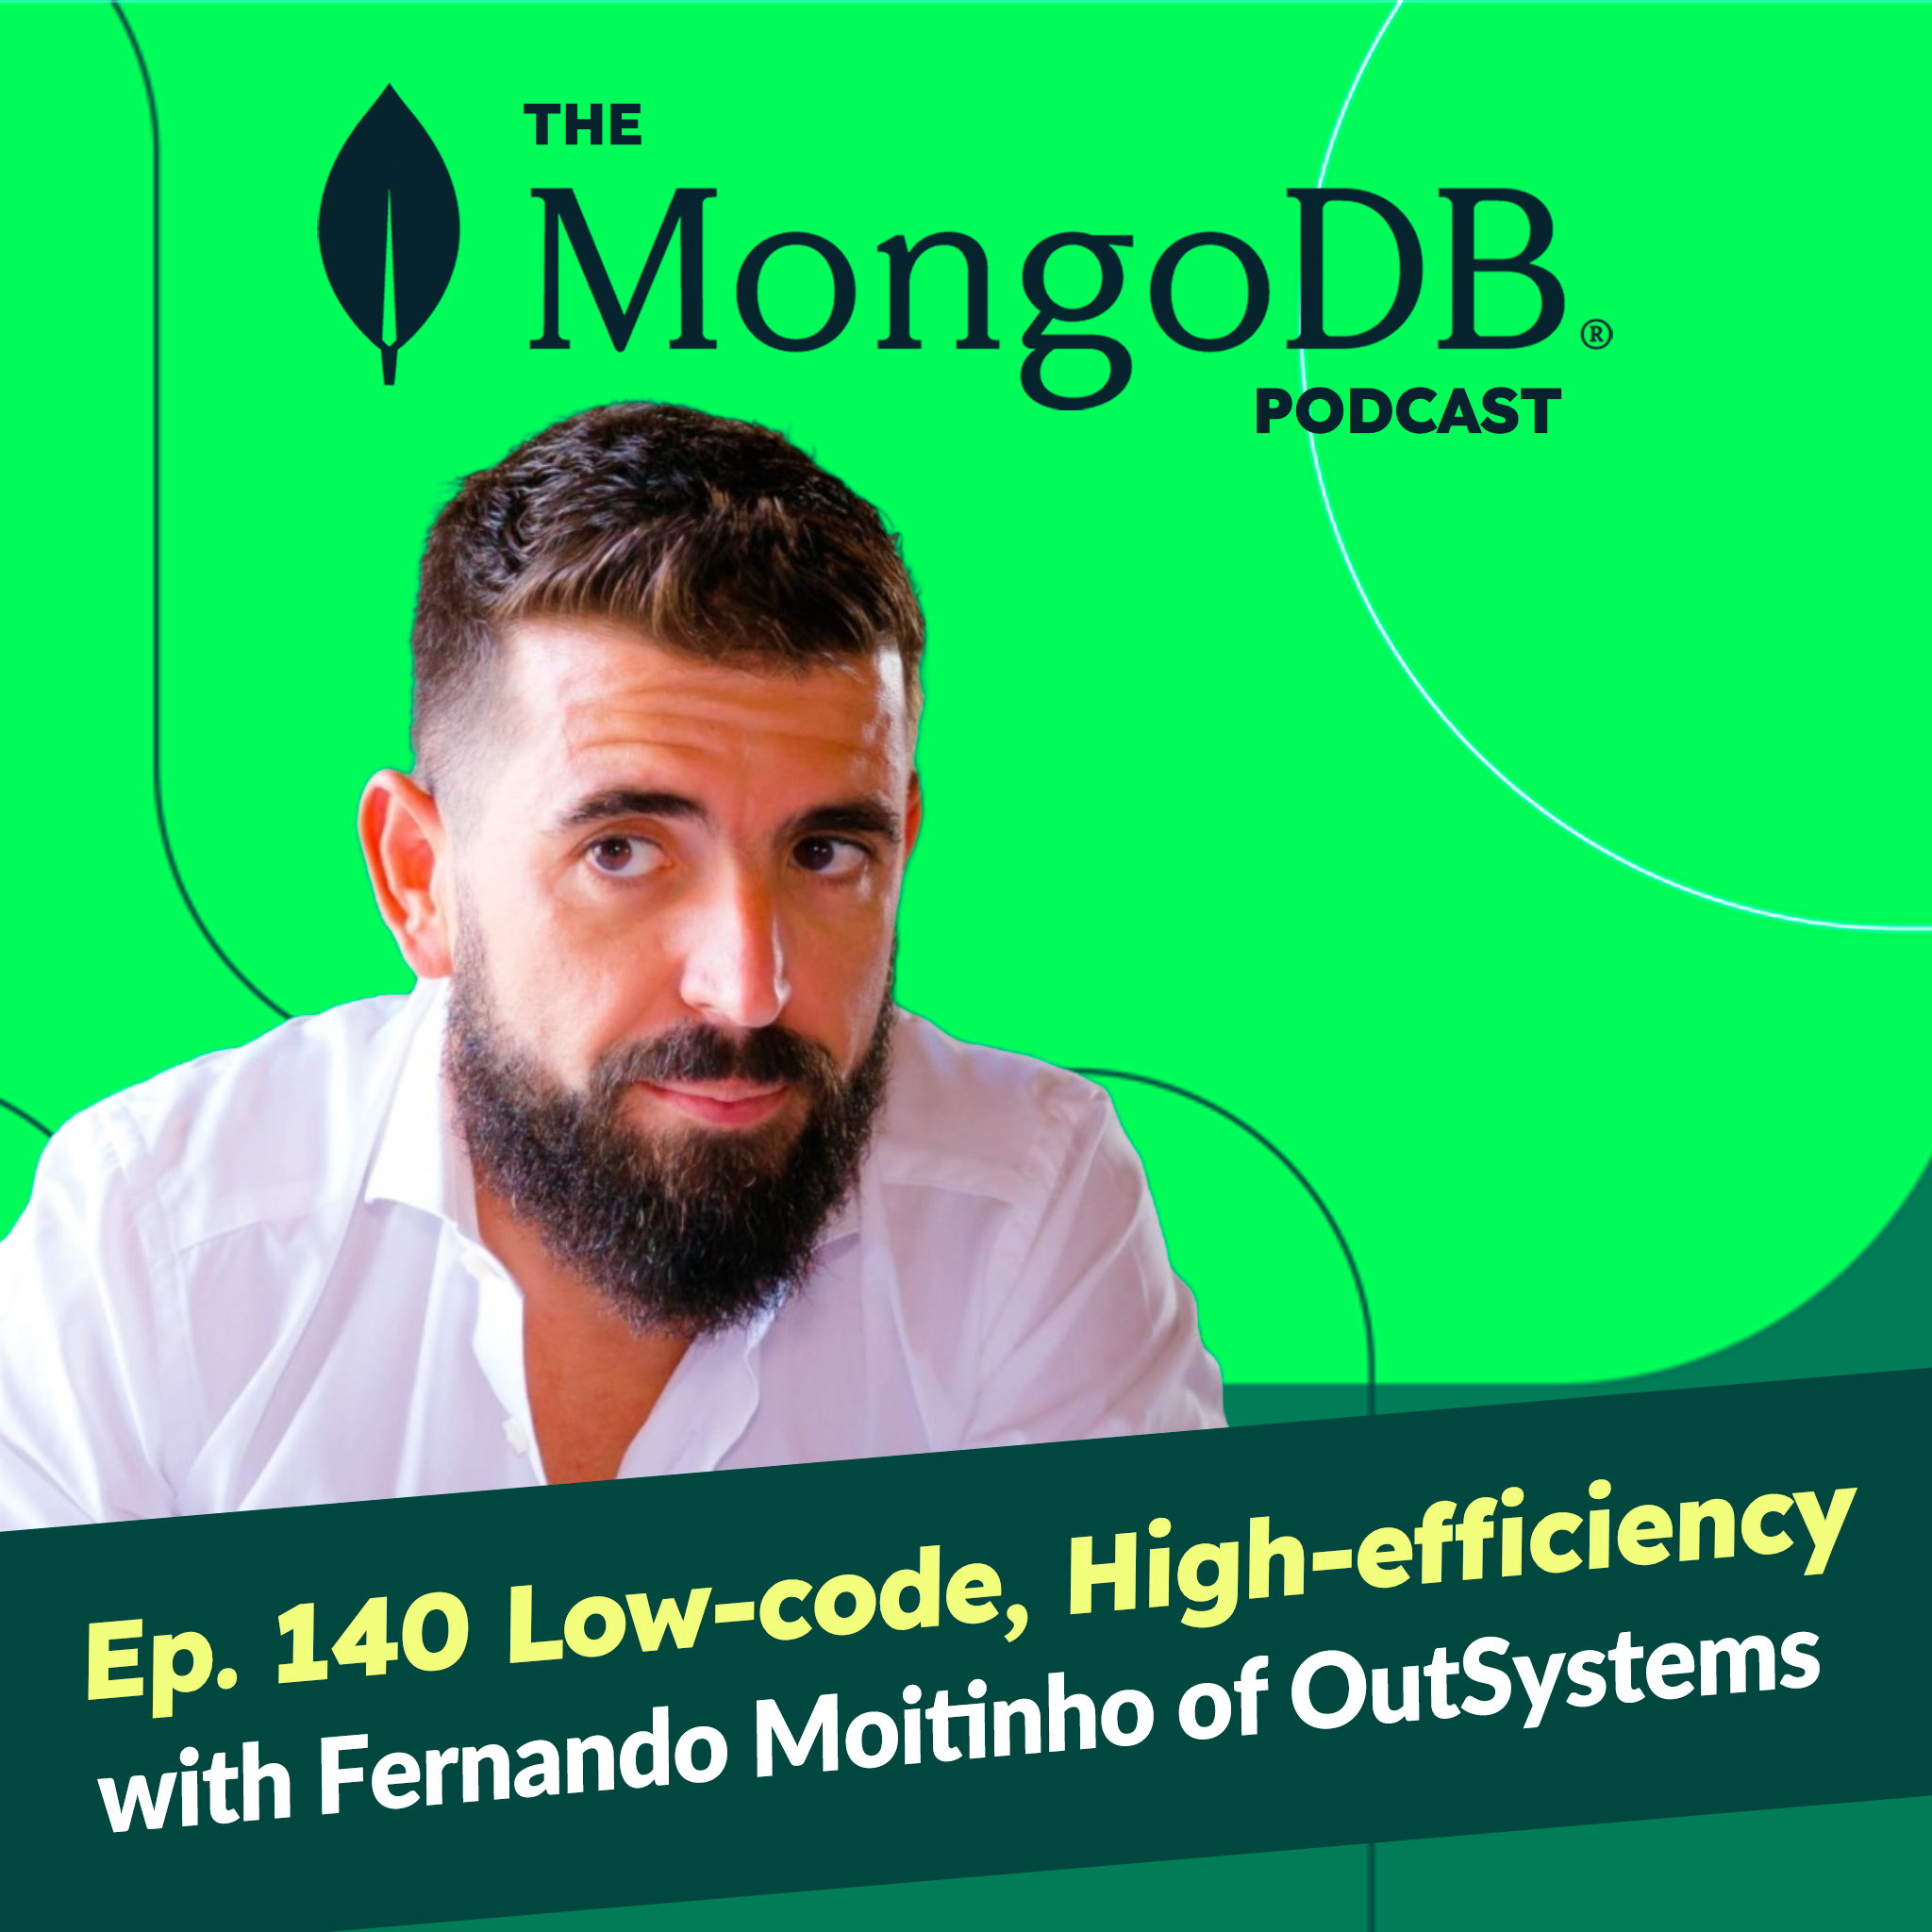 Ep 140 Low-code, High-efficiency with Fernando Moitinho from OutSystems